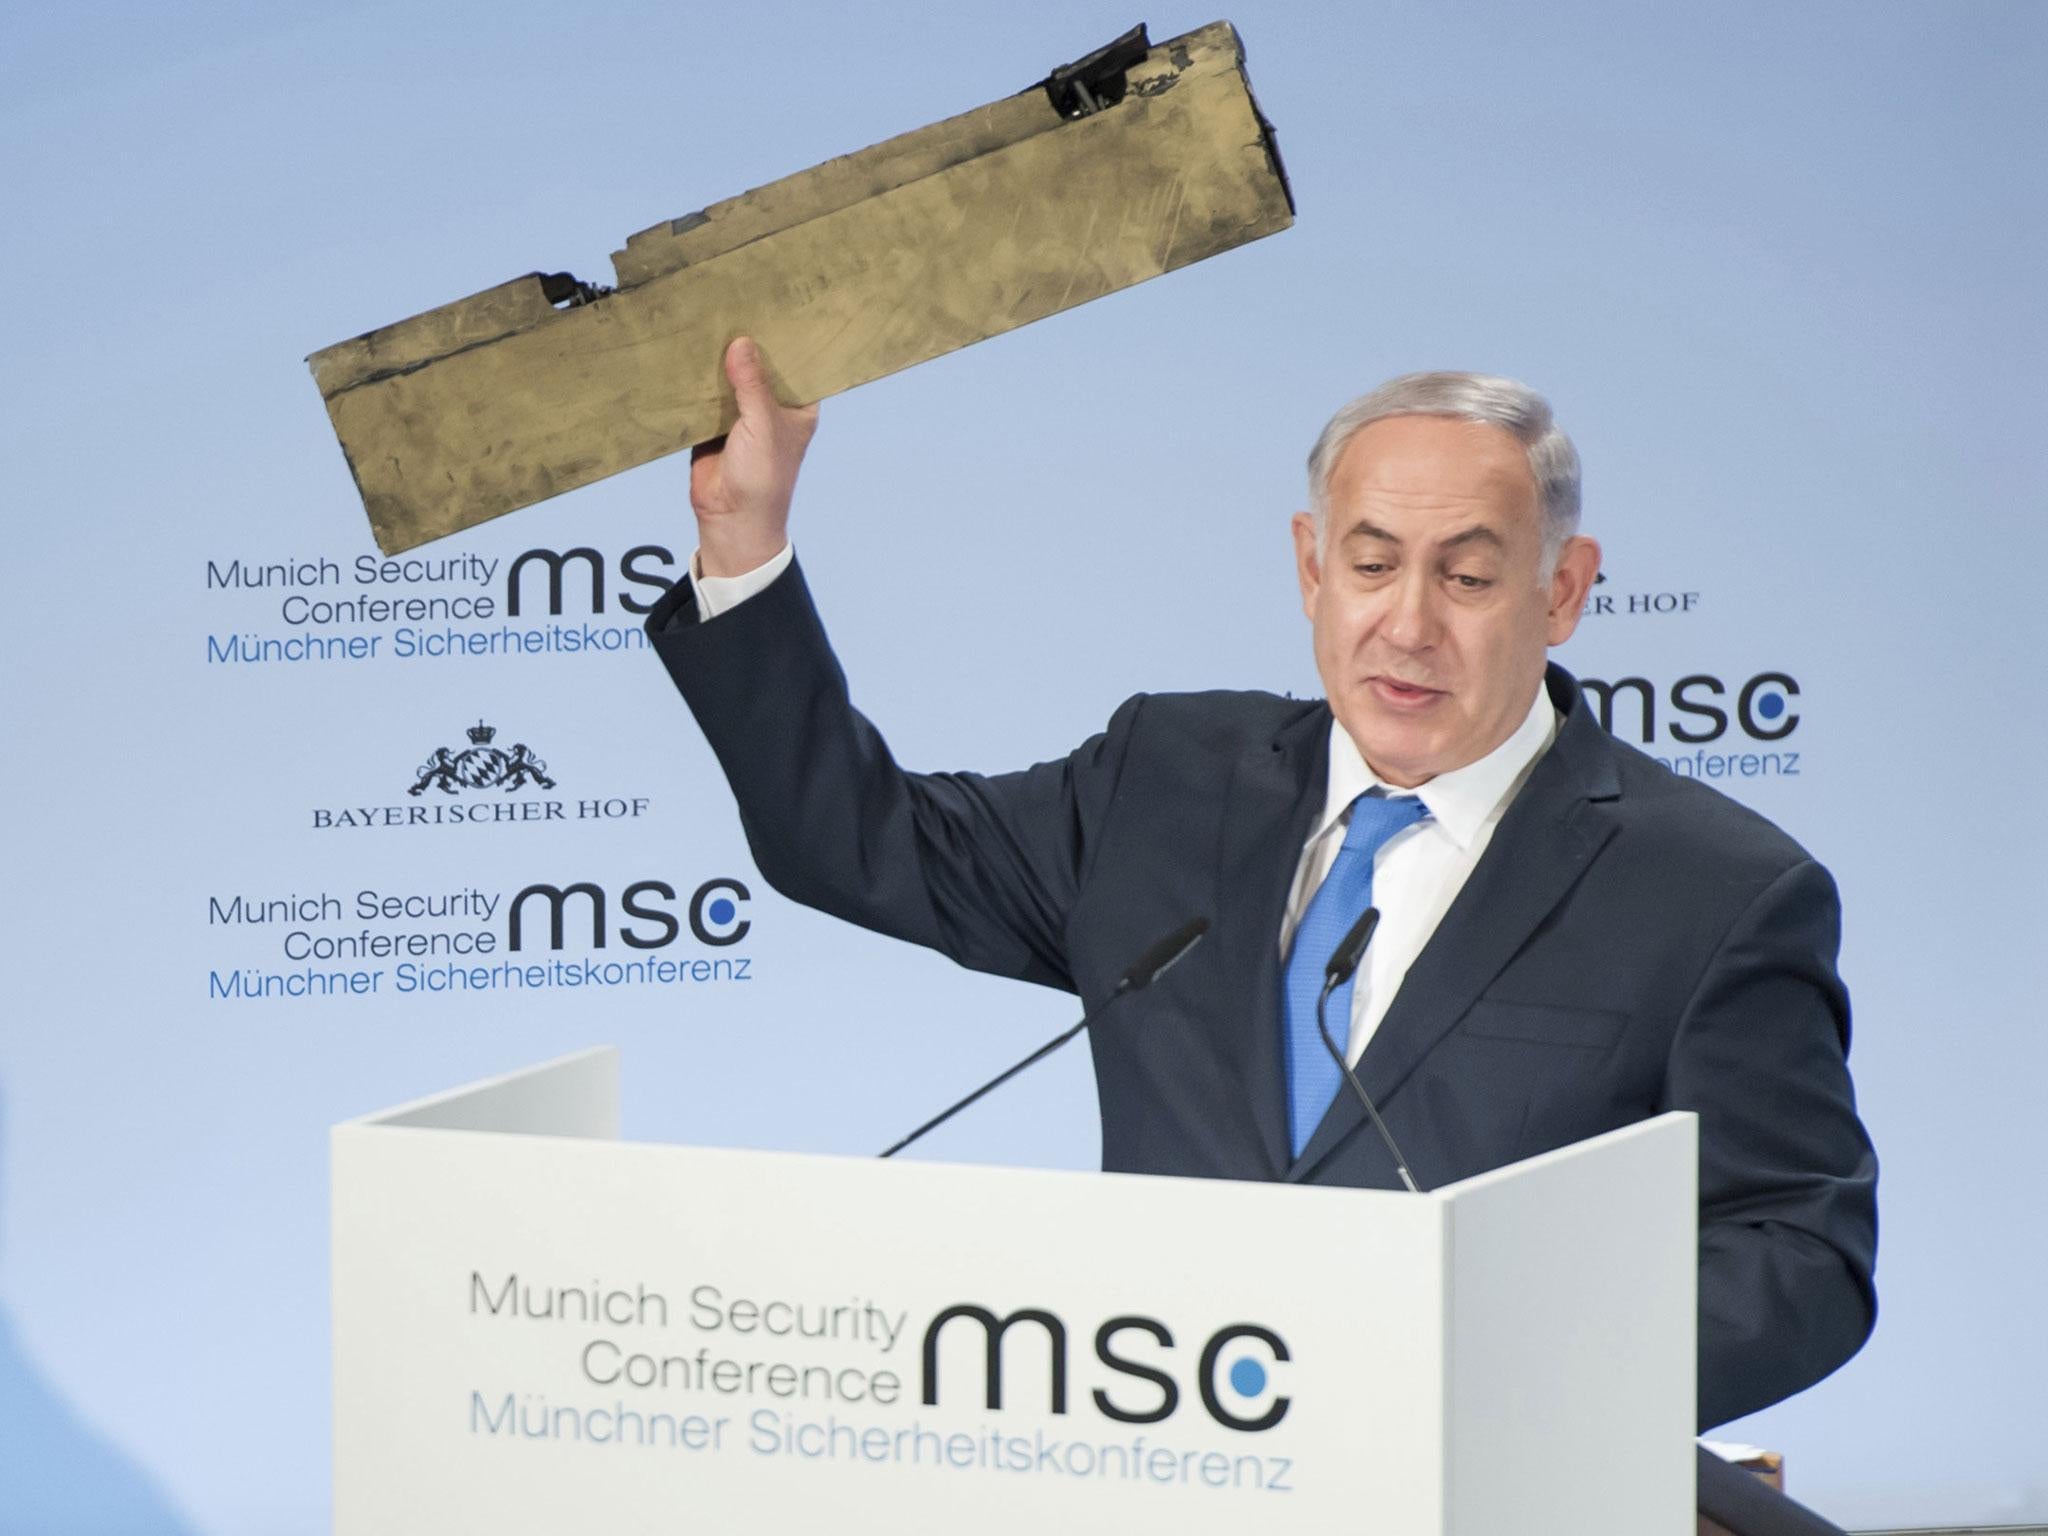 Benjamin Netanyahu, Israel’s Prime Minister, holds a part of a downed drone during his speech at the Munich Security Conference